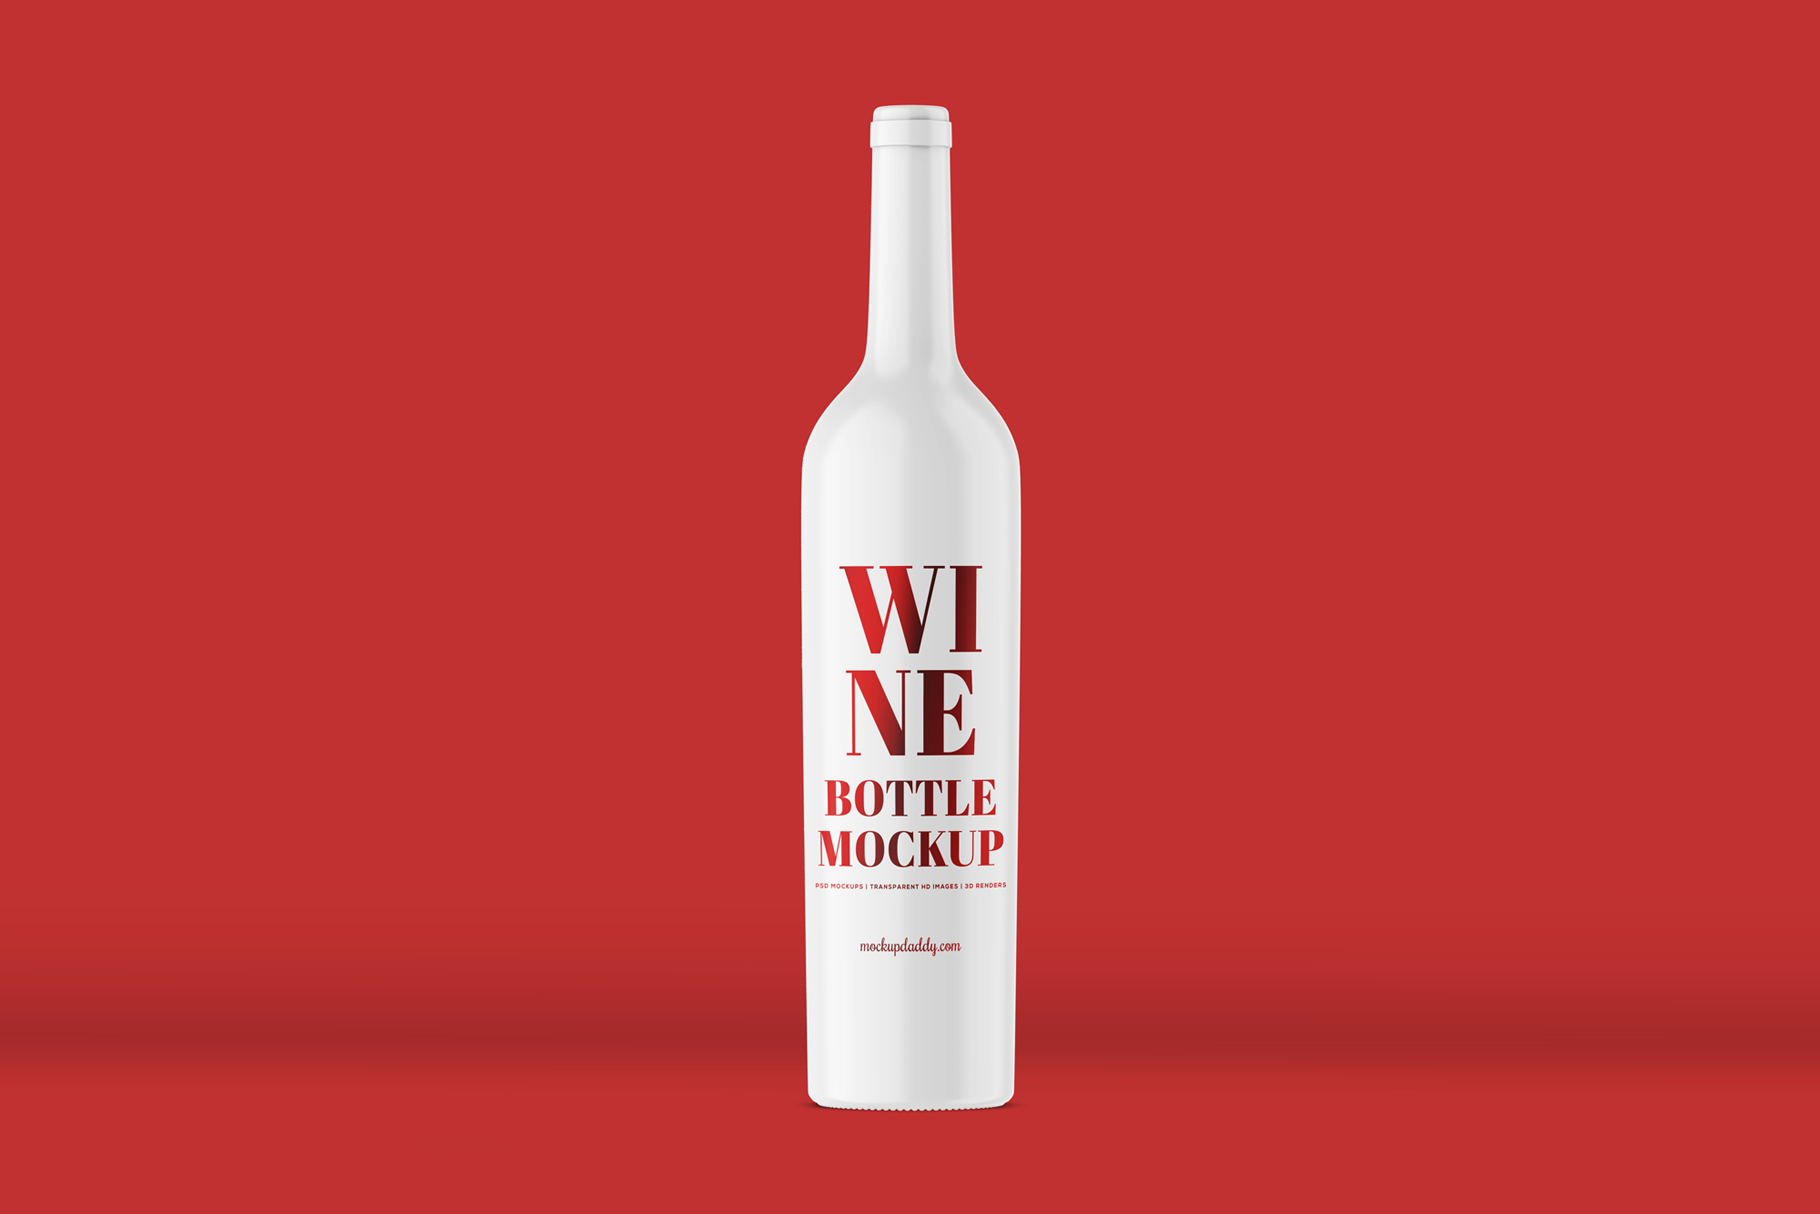 white wine Clay Bottle Mockup with red text and background.